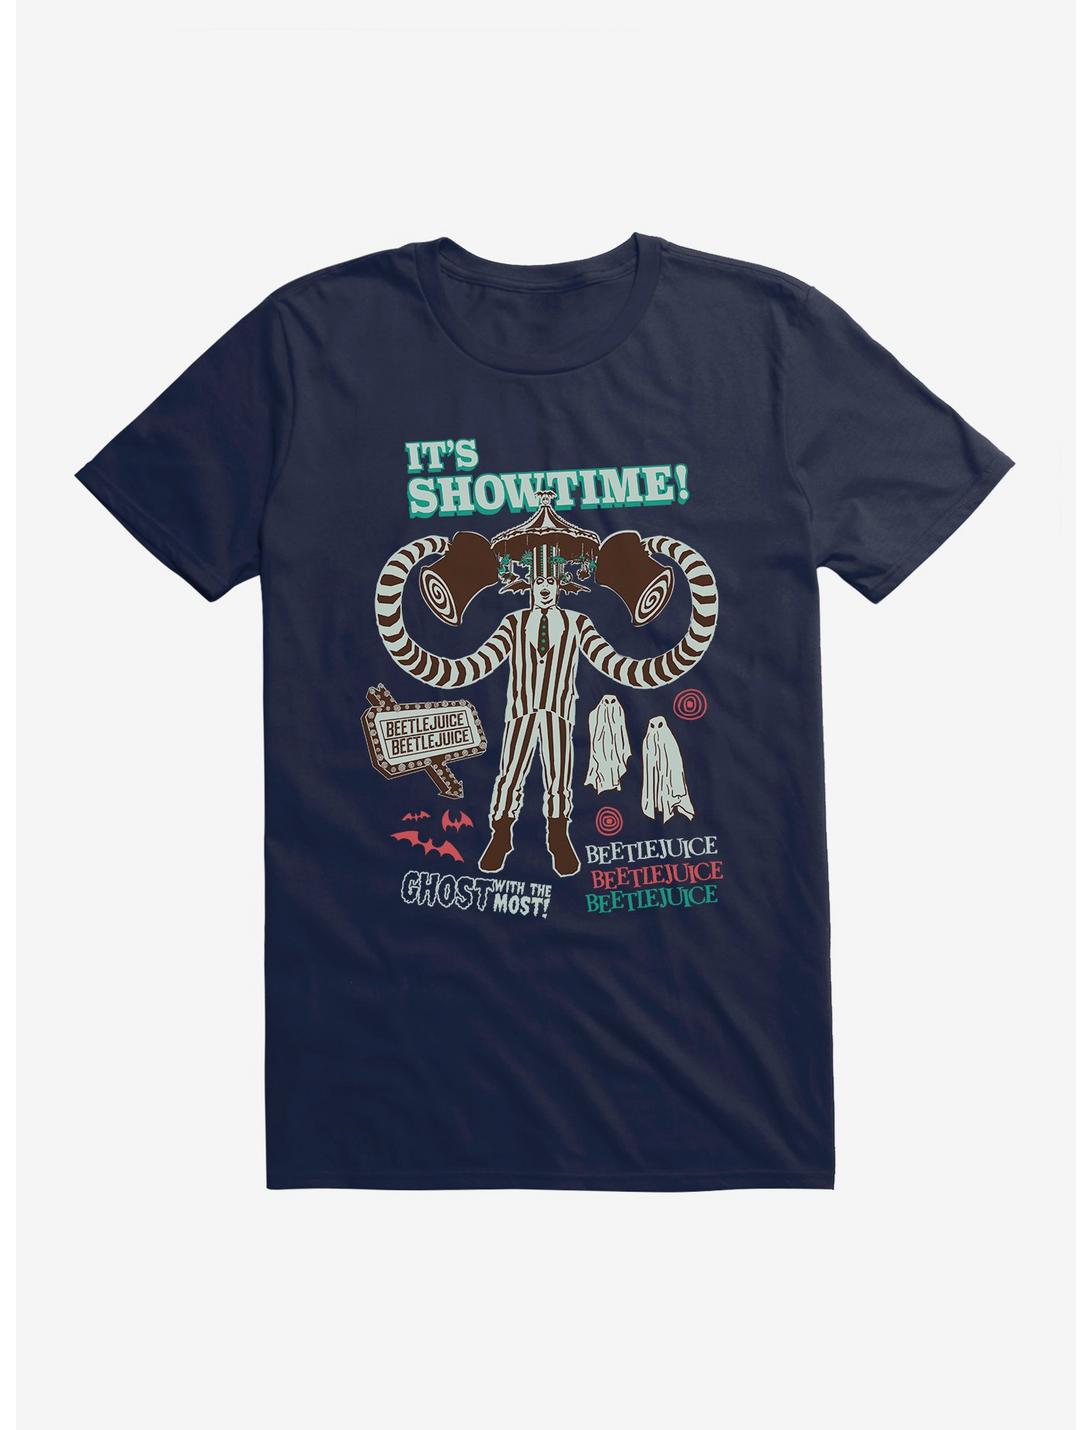 Beetlejuice Ghost With The Most! T-Shirt, MIDNIGHT NAVY, hi-res